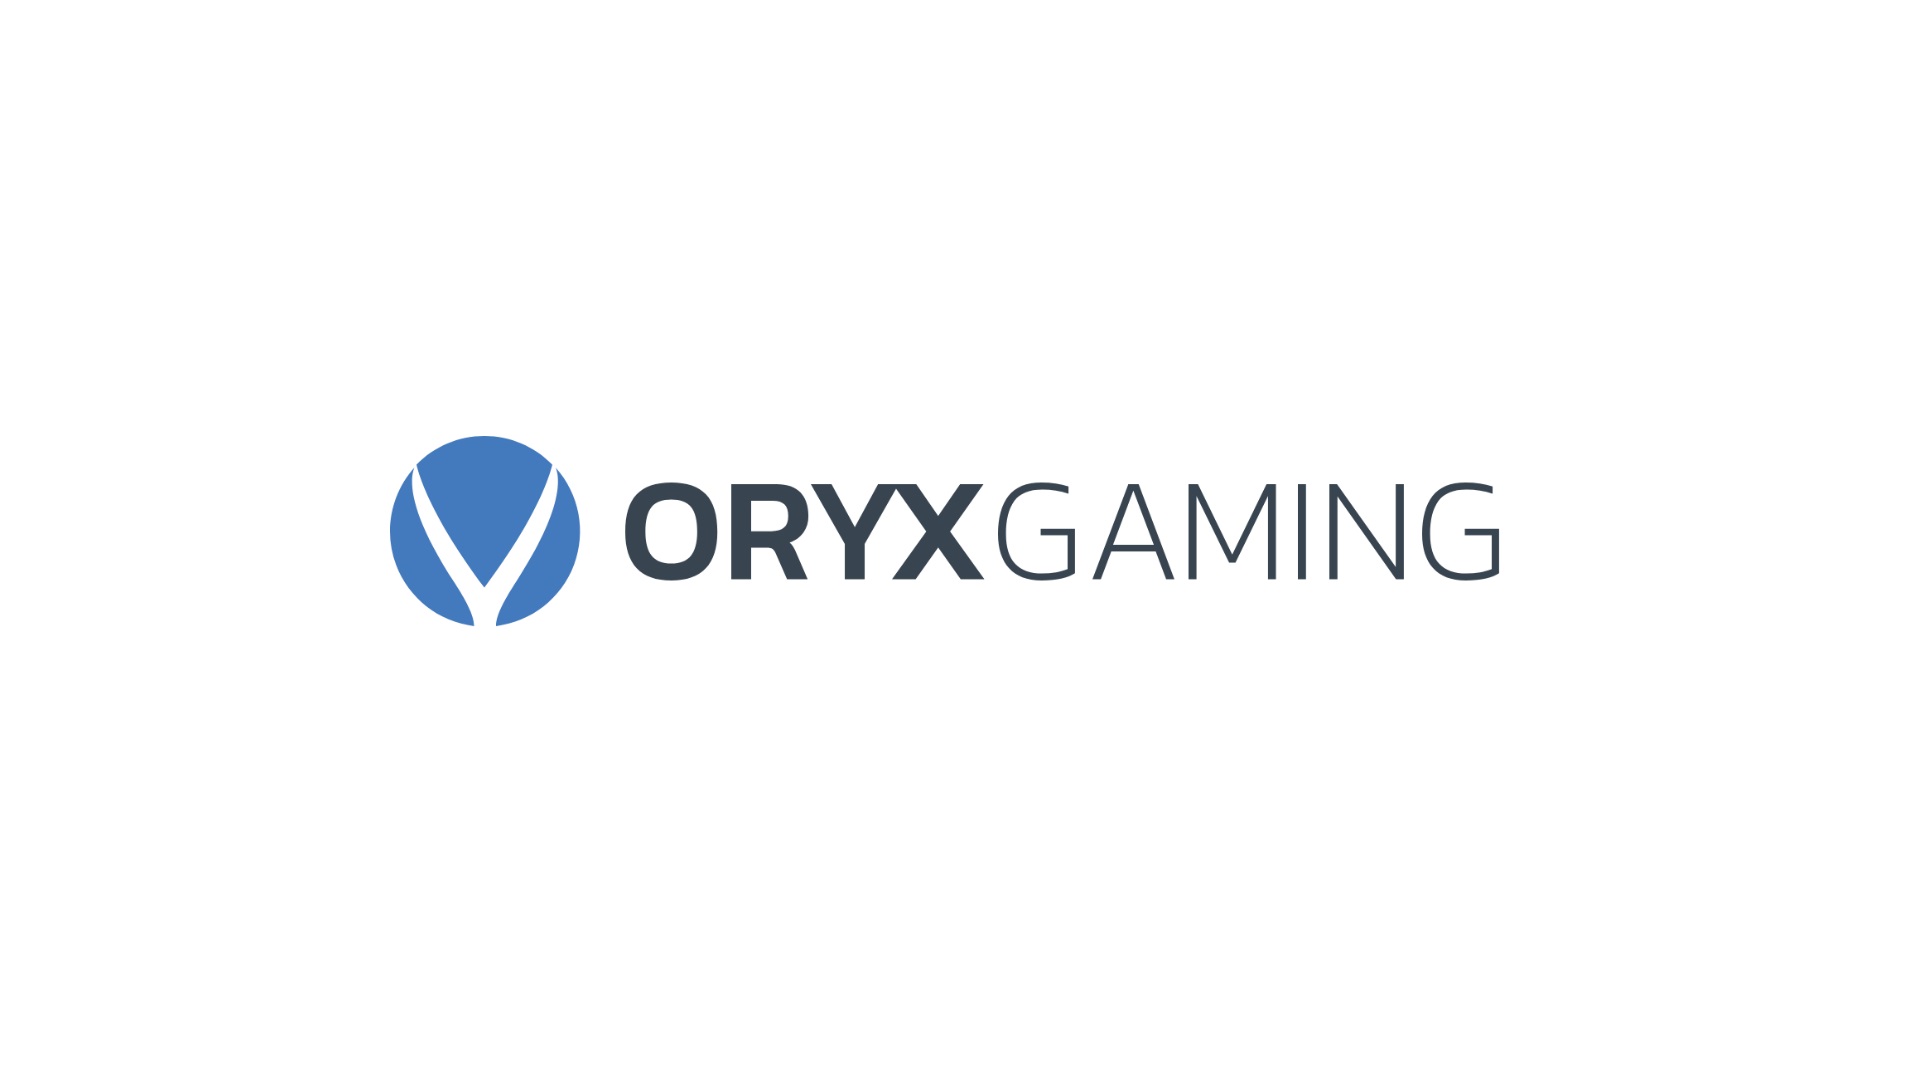 Bragg’s ORYX Gaming content launches with 888 in the UK